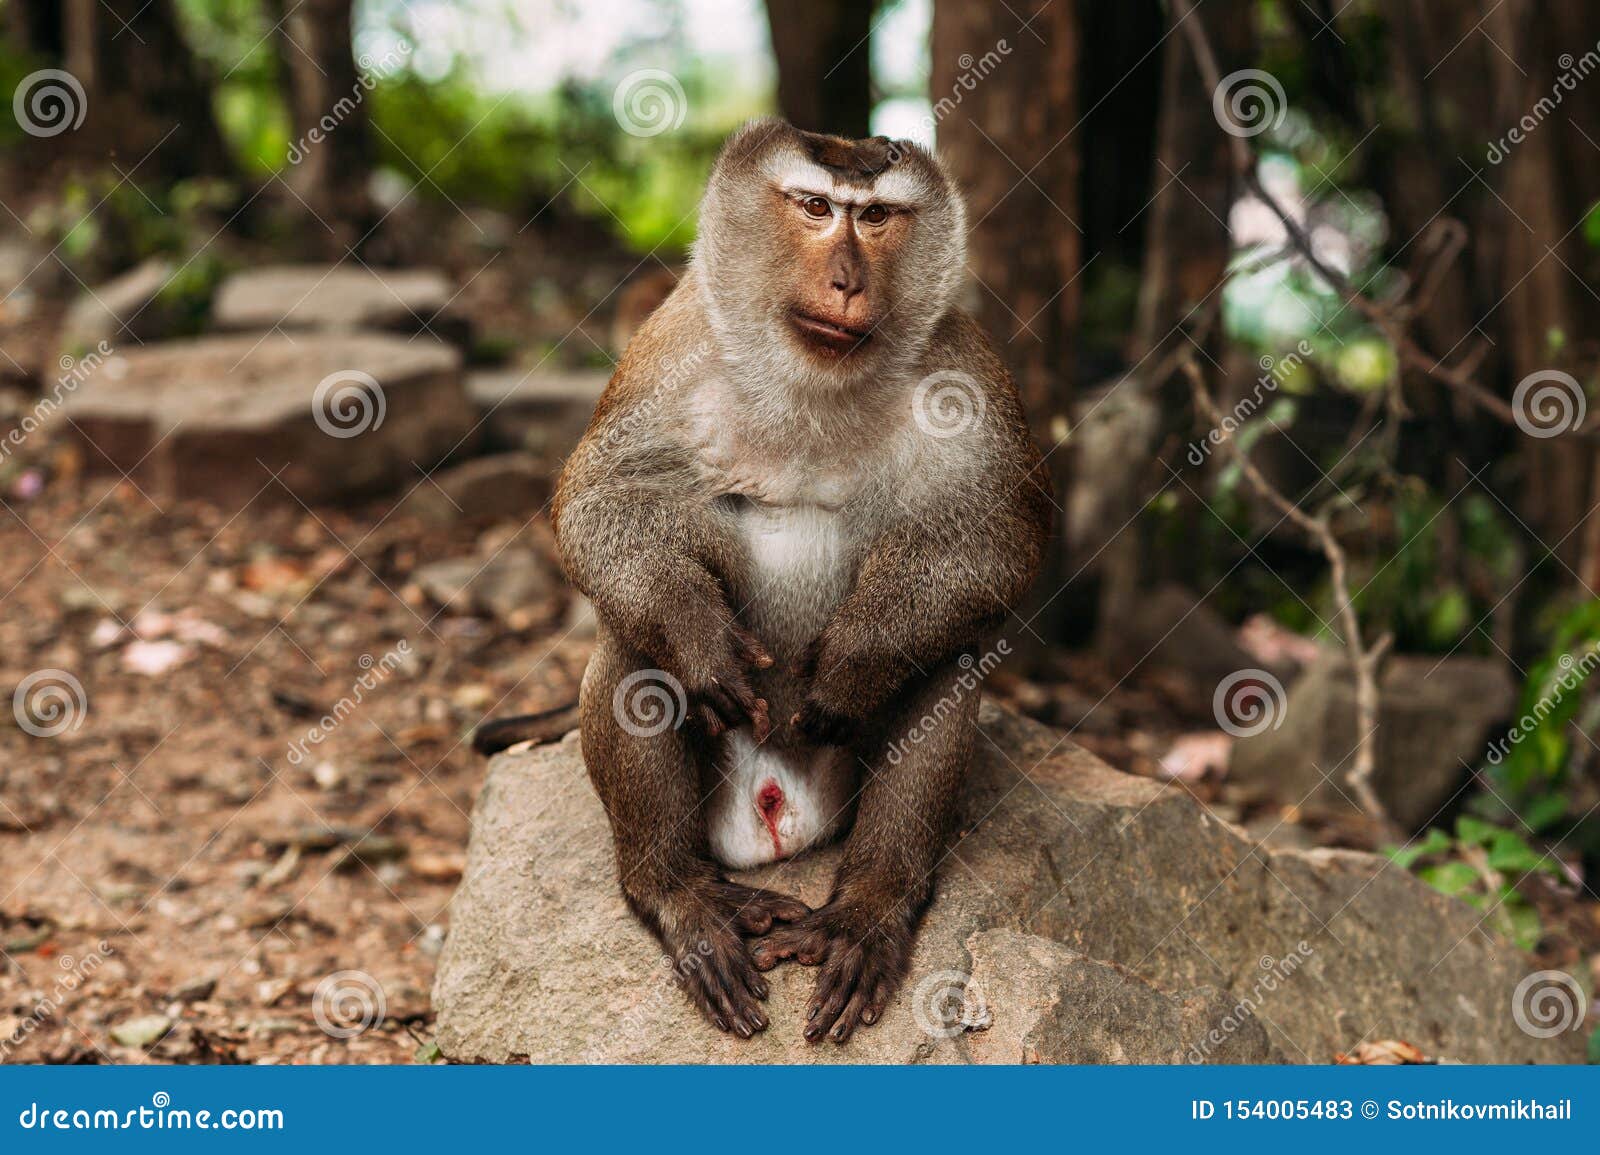 portrait of a wild monkey. a selfie of a monkey. macaque looks at the camera. wild primates. wild animal. animal eyes